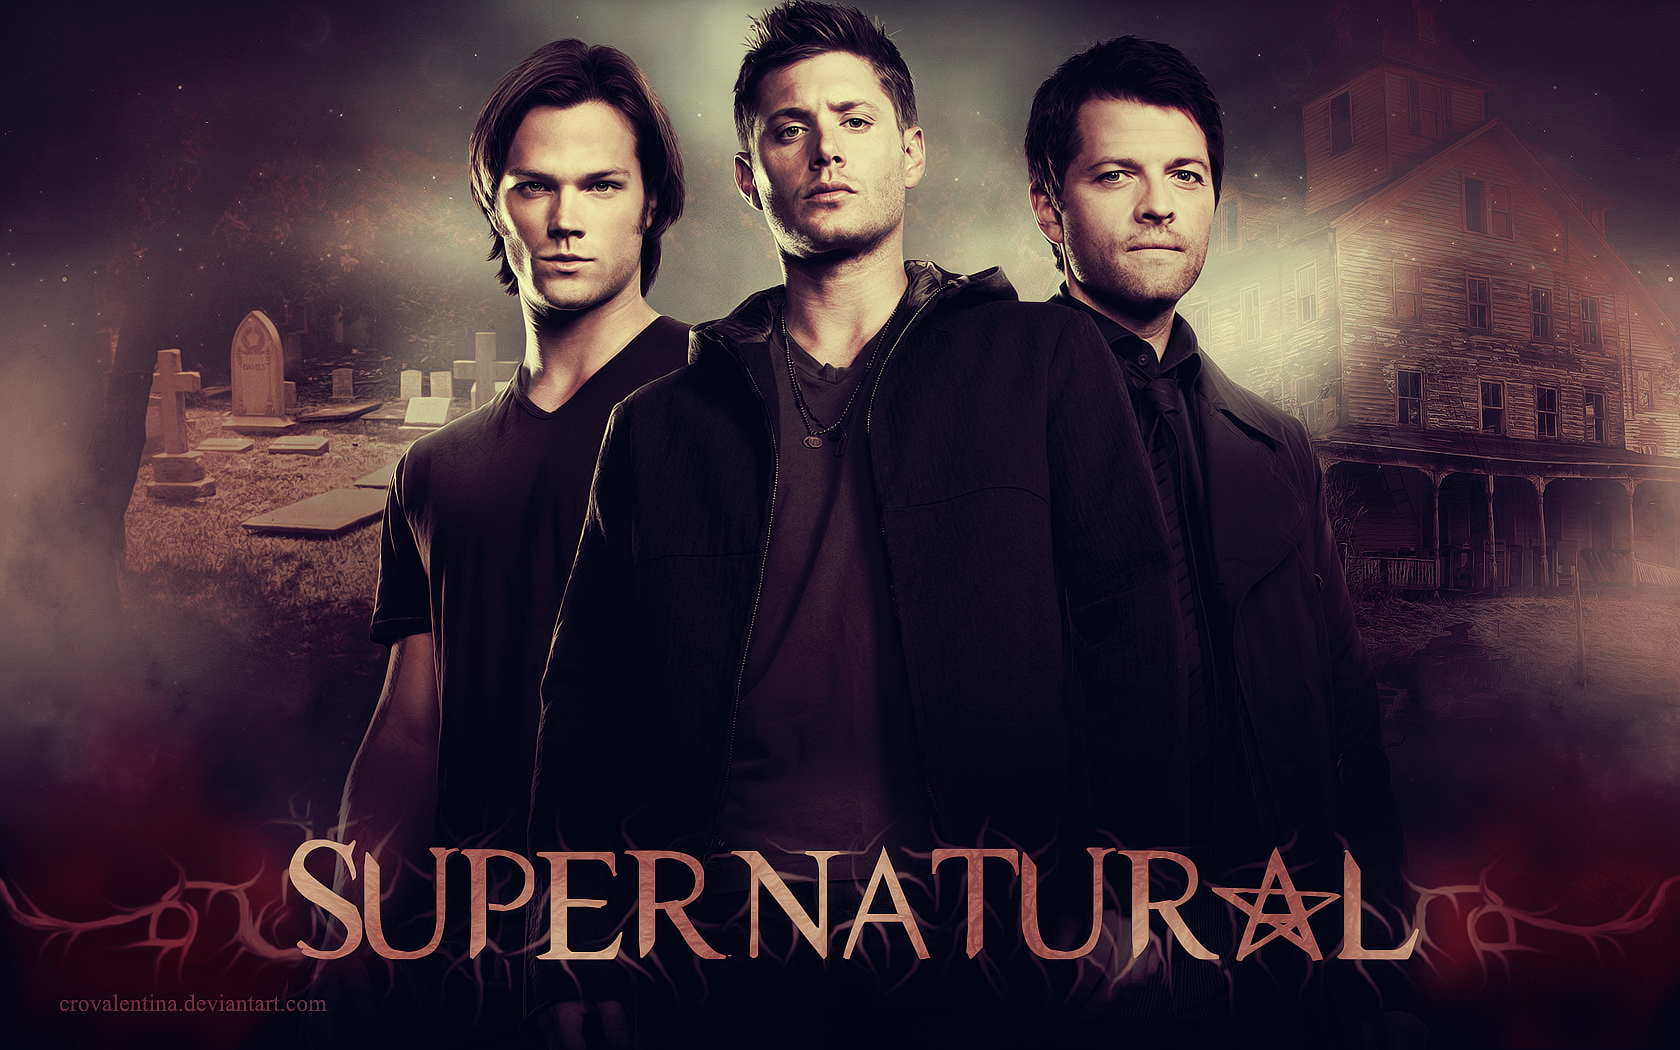 Which Supernatural Character Are You?